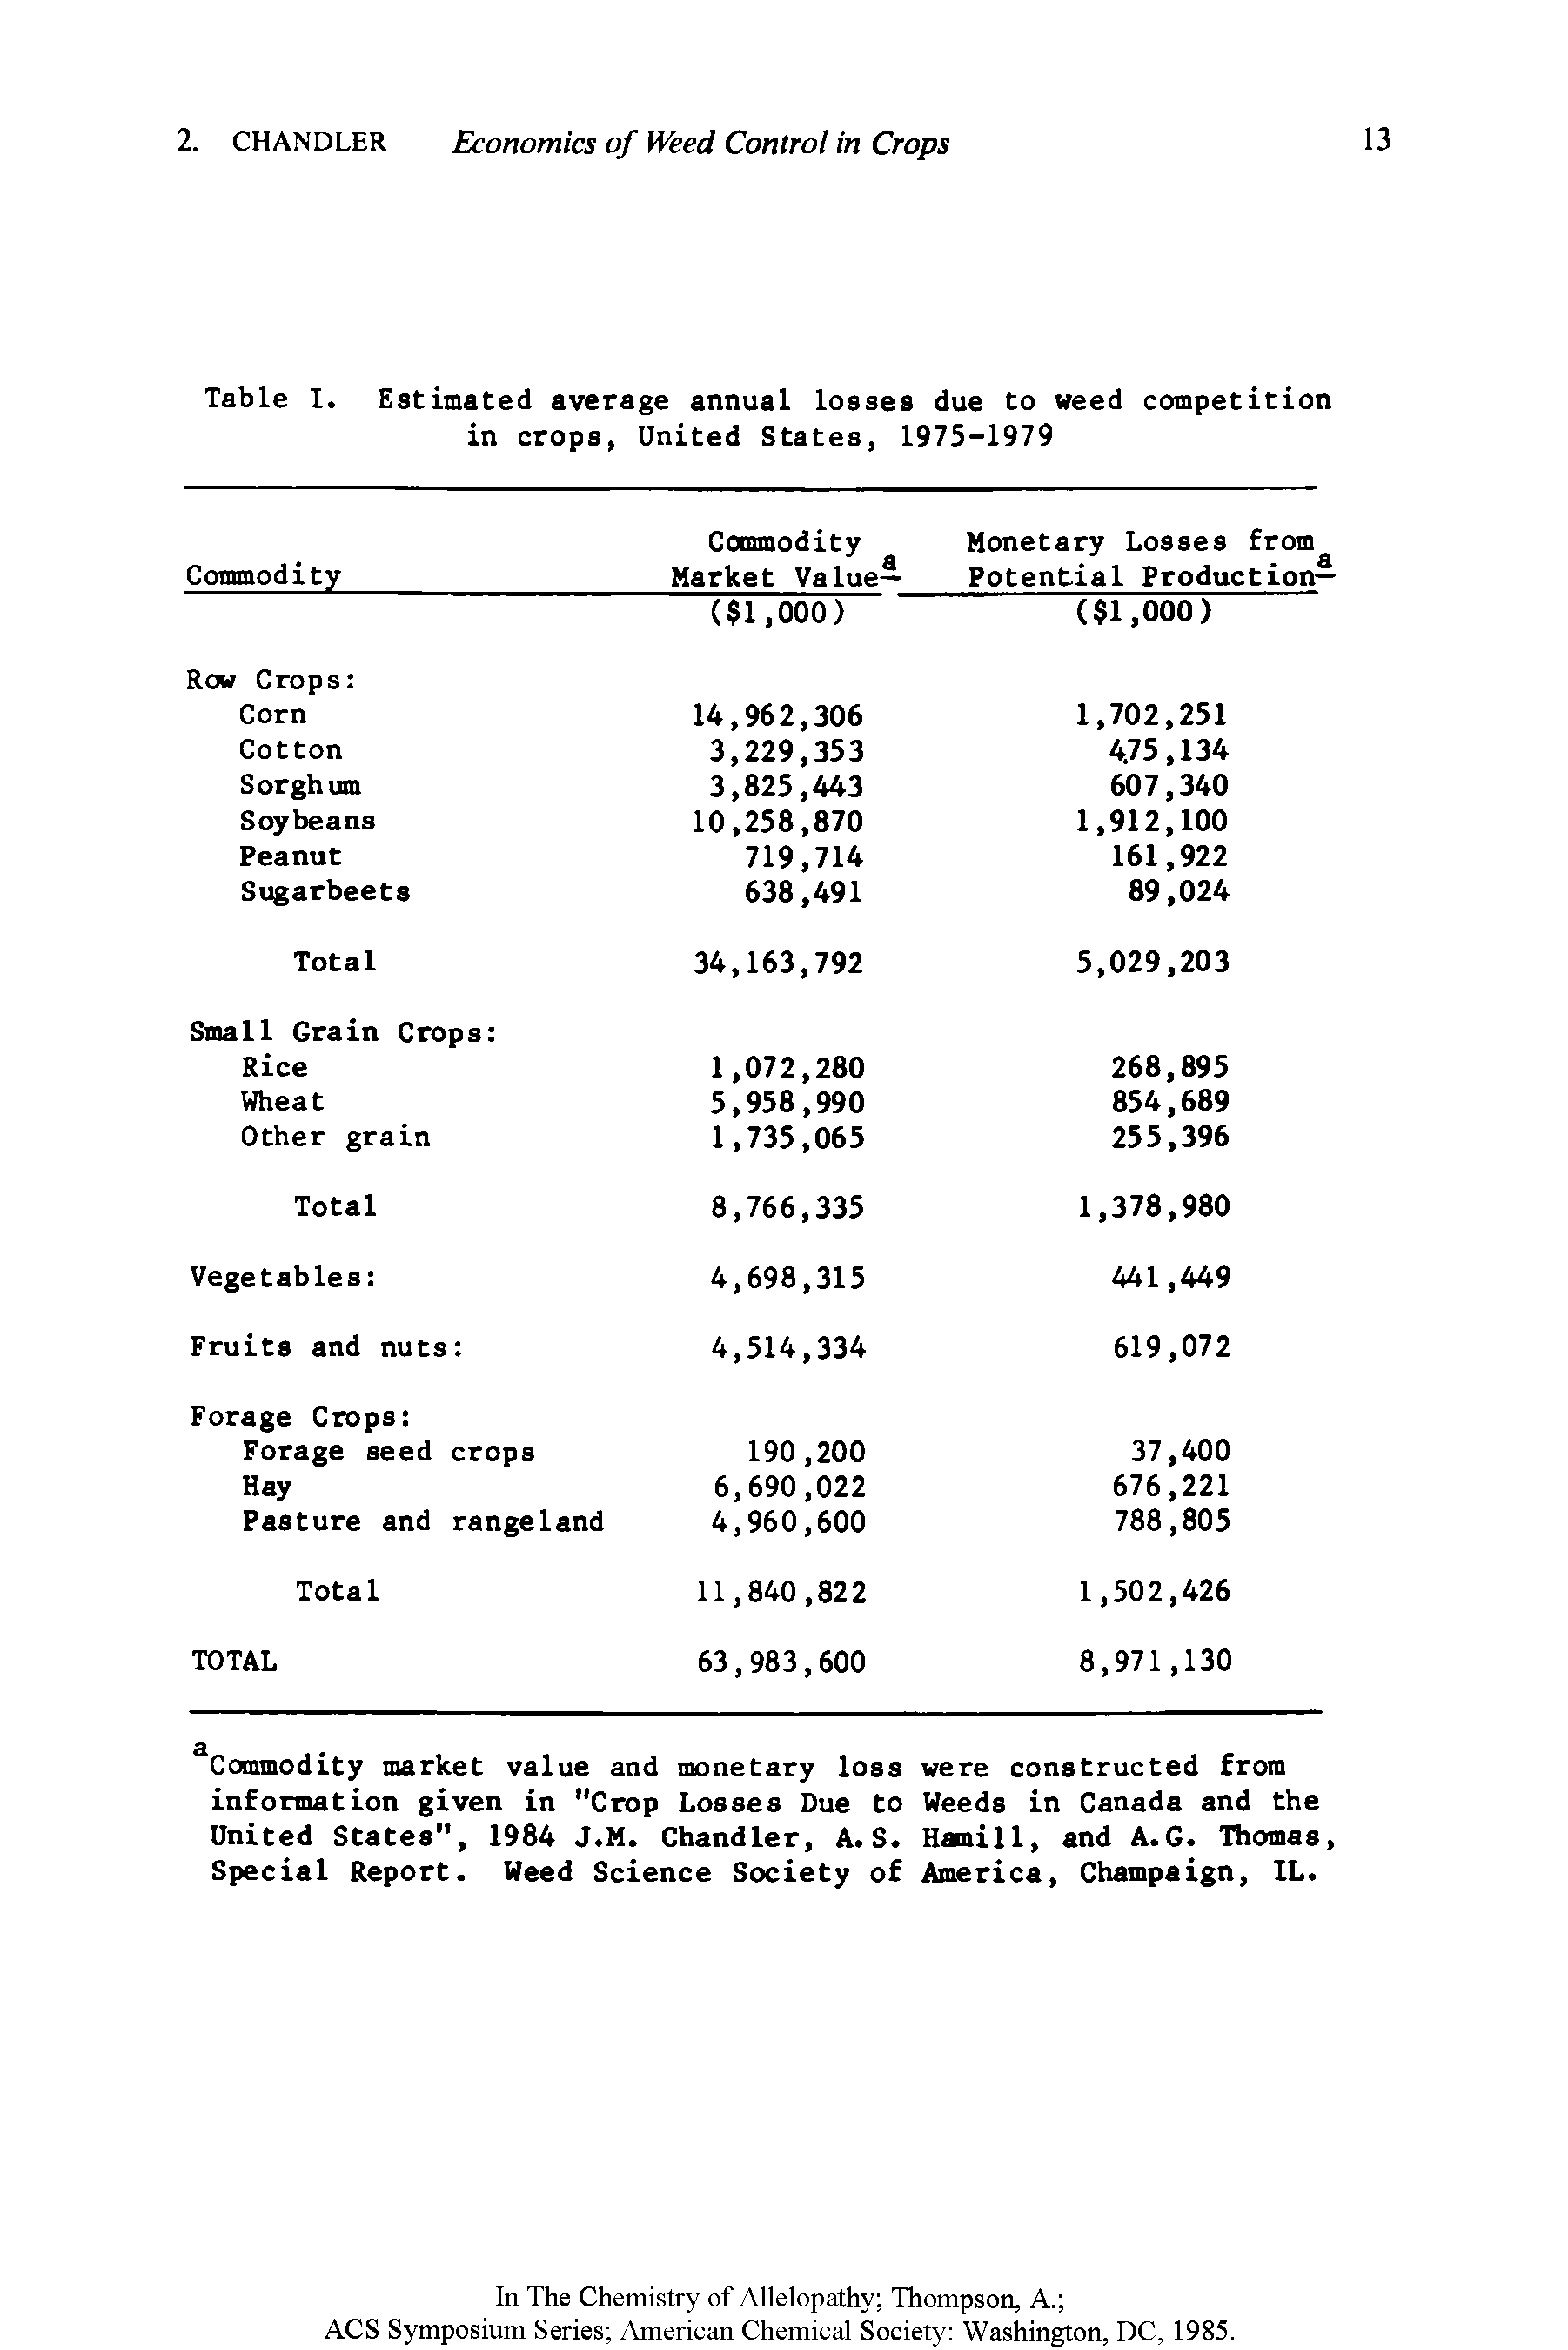 Table I. Estimated average annual losses due to weed competition in crops, United States, 1975-1979...